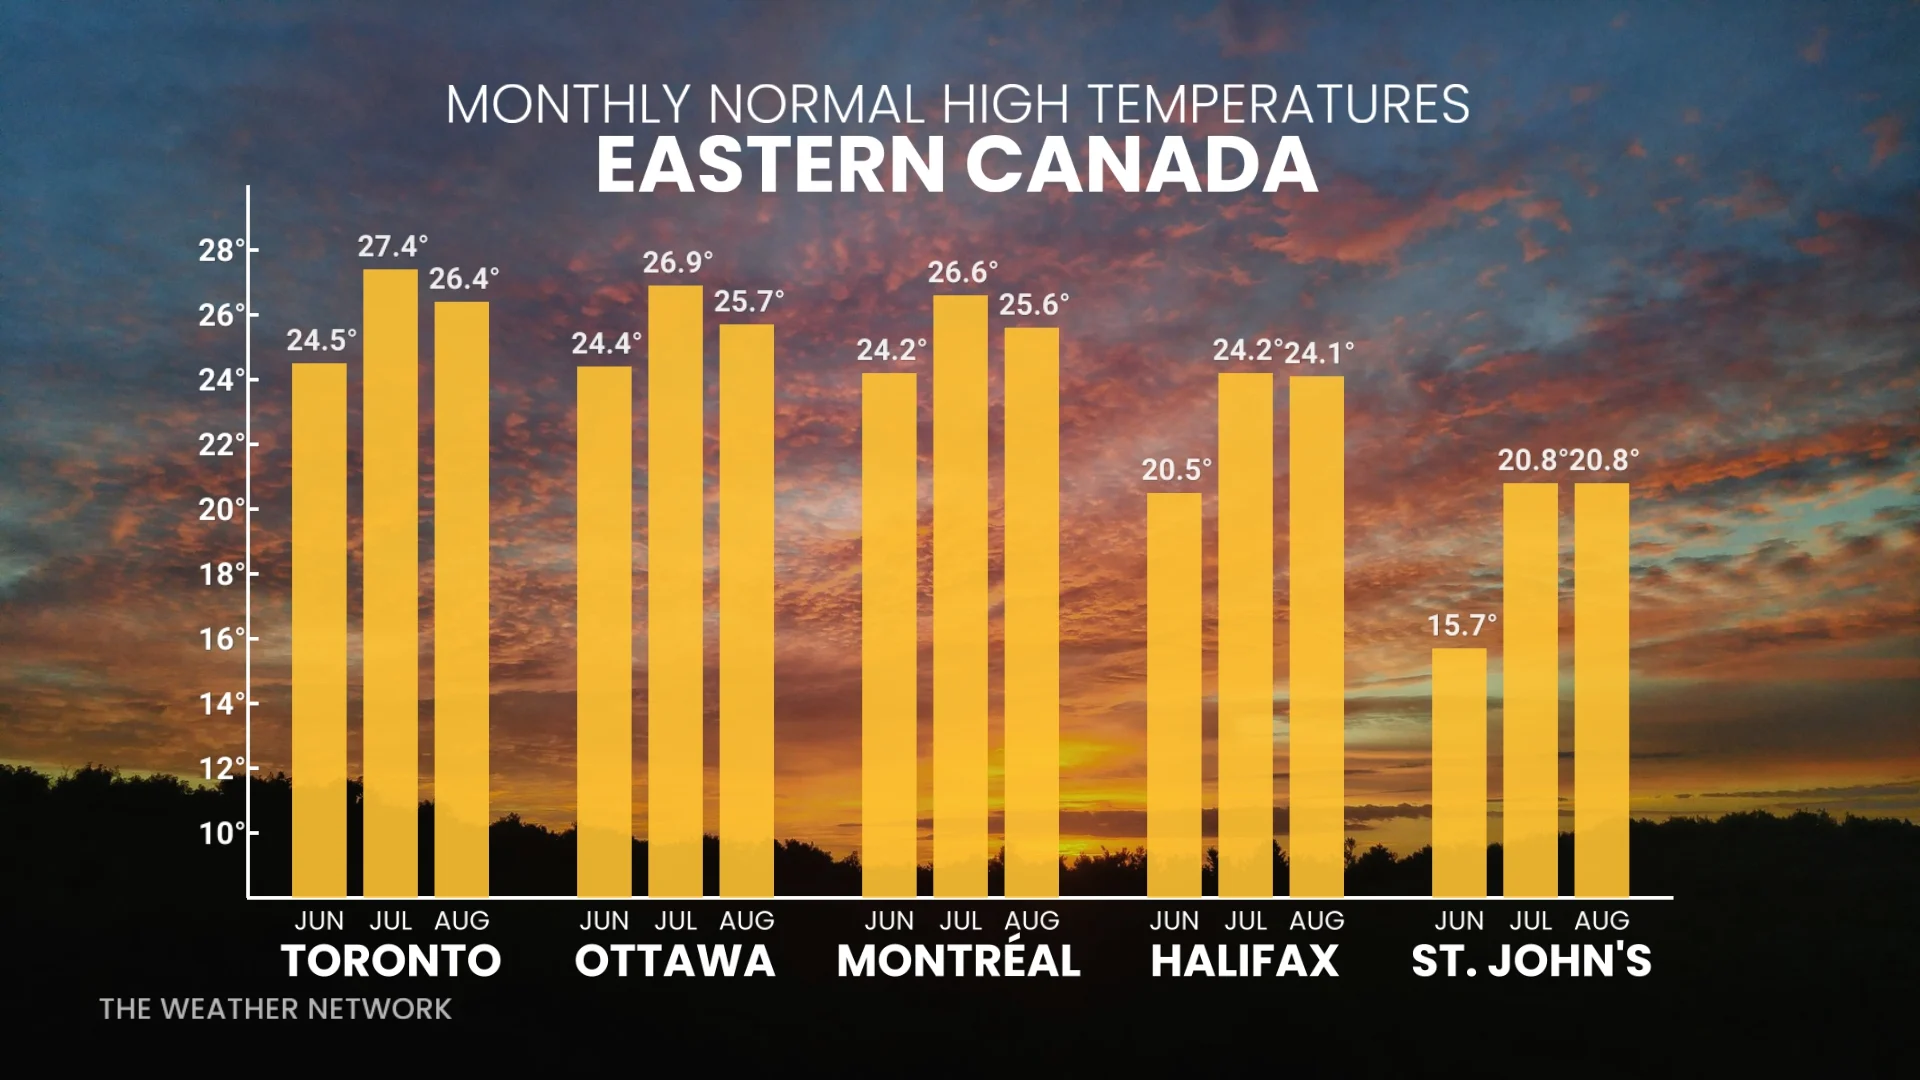 THE WEATHER NETWORK: Eastern Canada summer temperature 'normals'